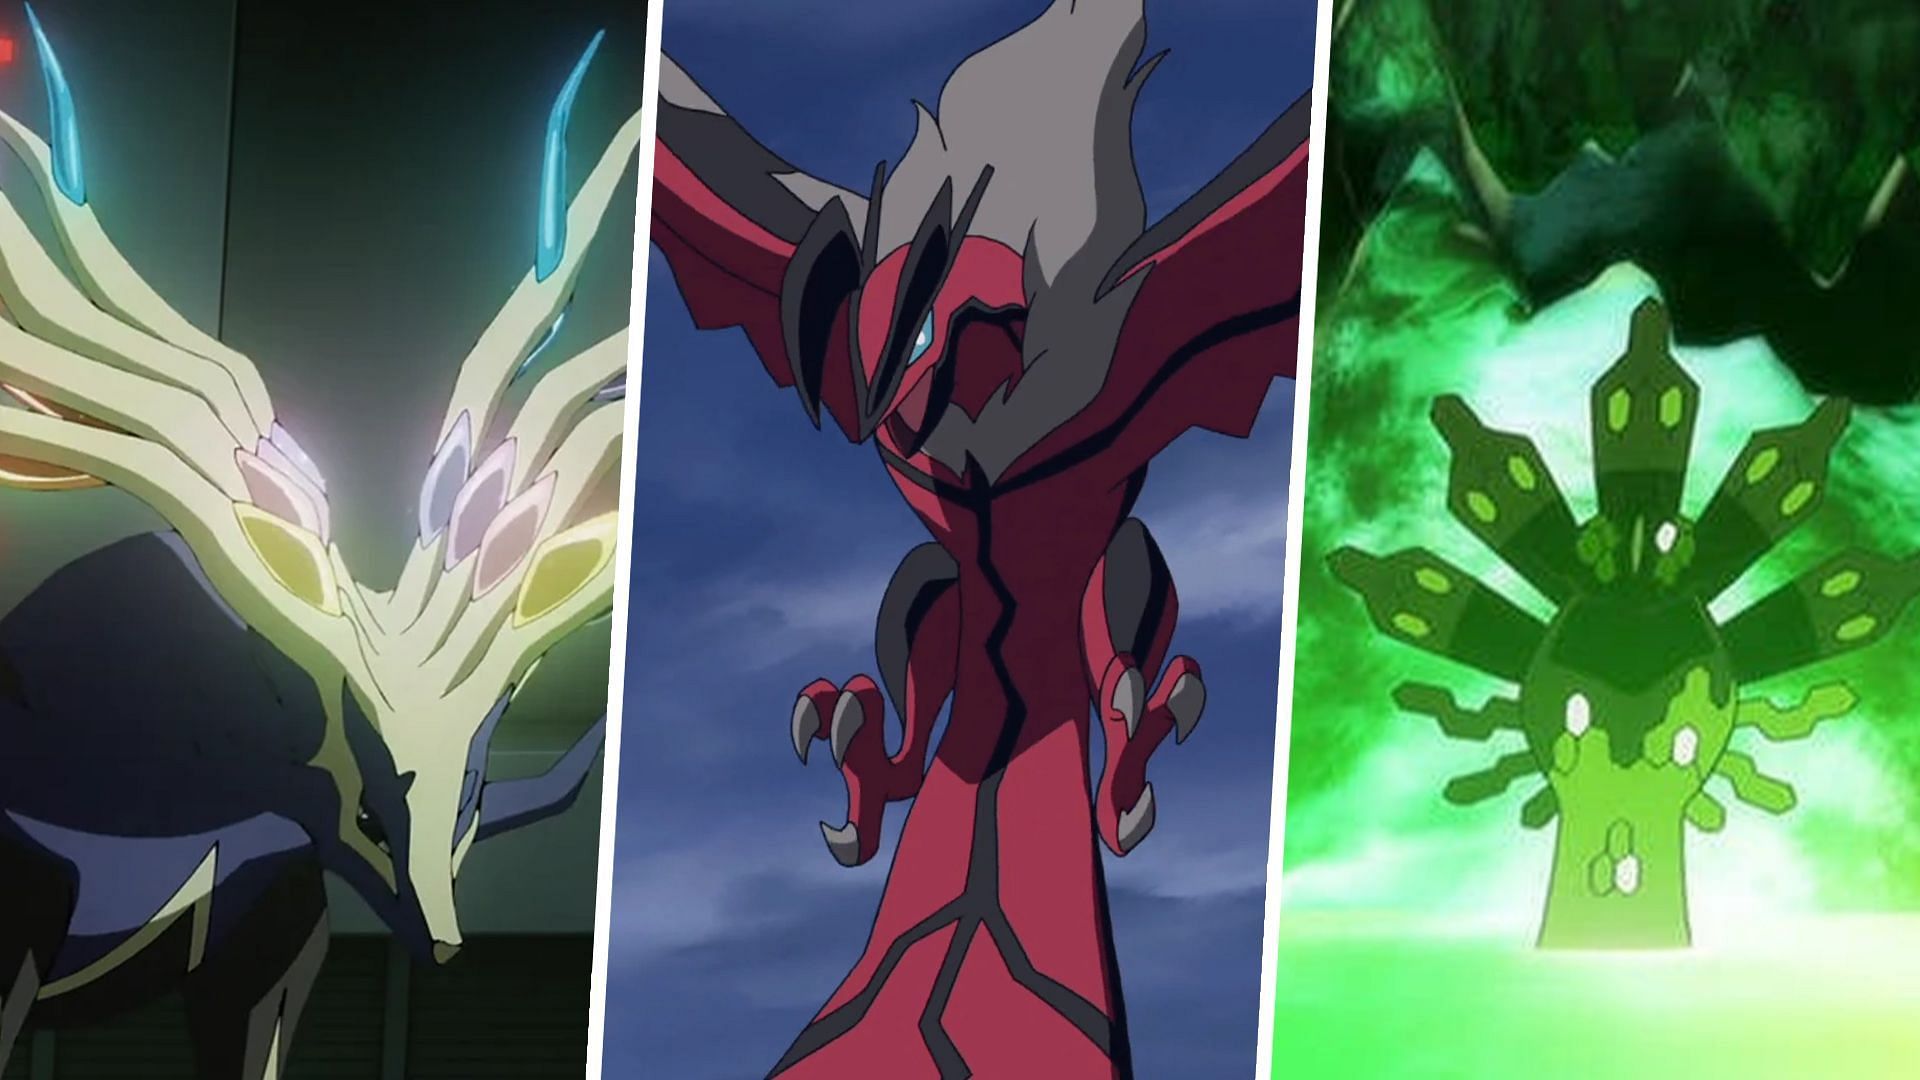 Xerneas, Yveltal, and Zygarde as seen in the anime (Image via TPC)